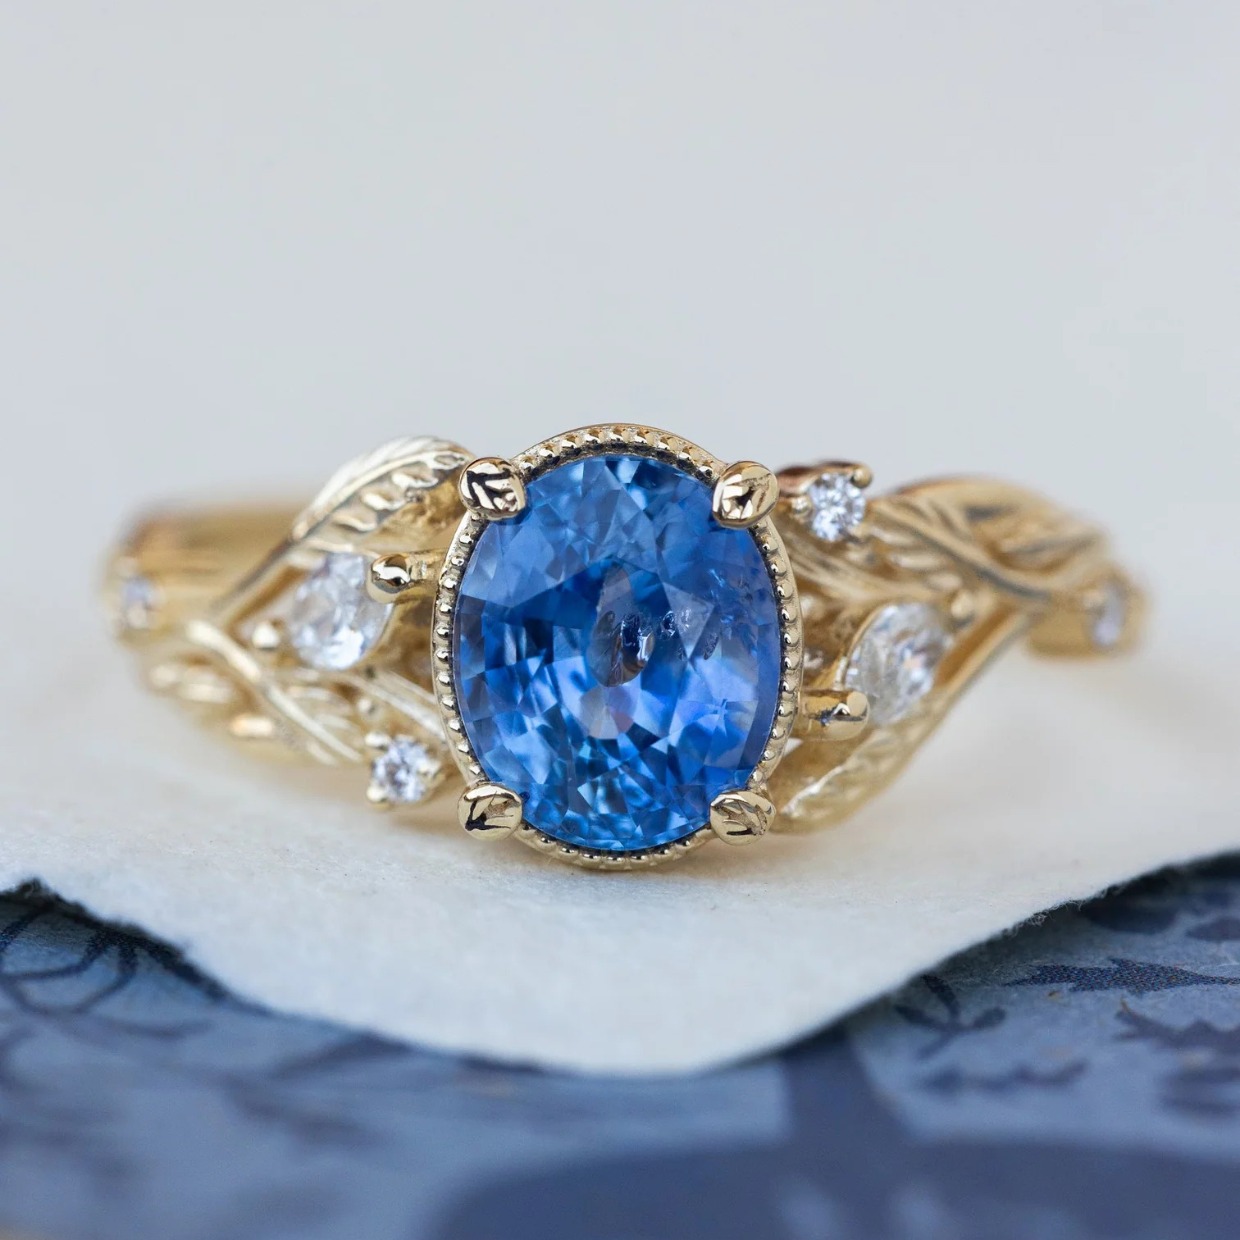 Blue sapphire and gold engagement ring 